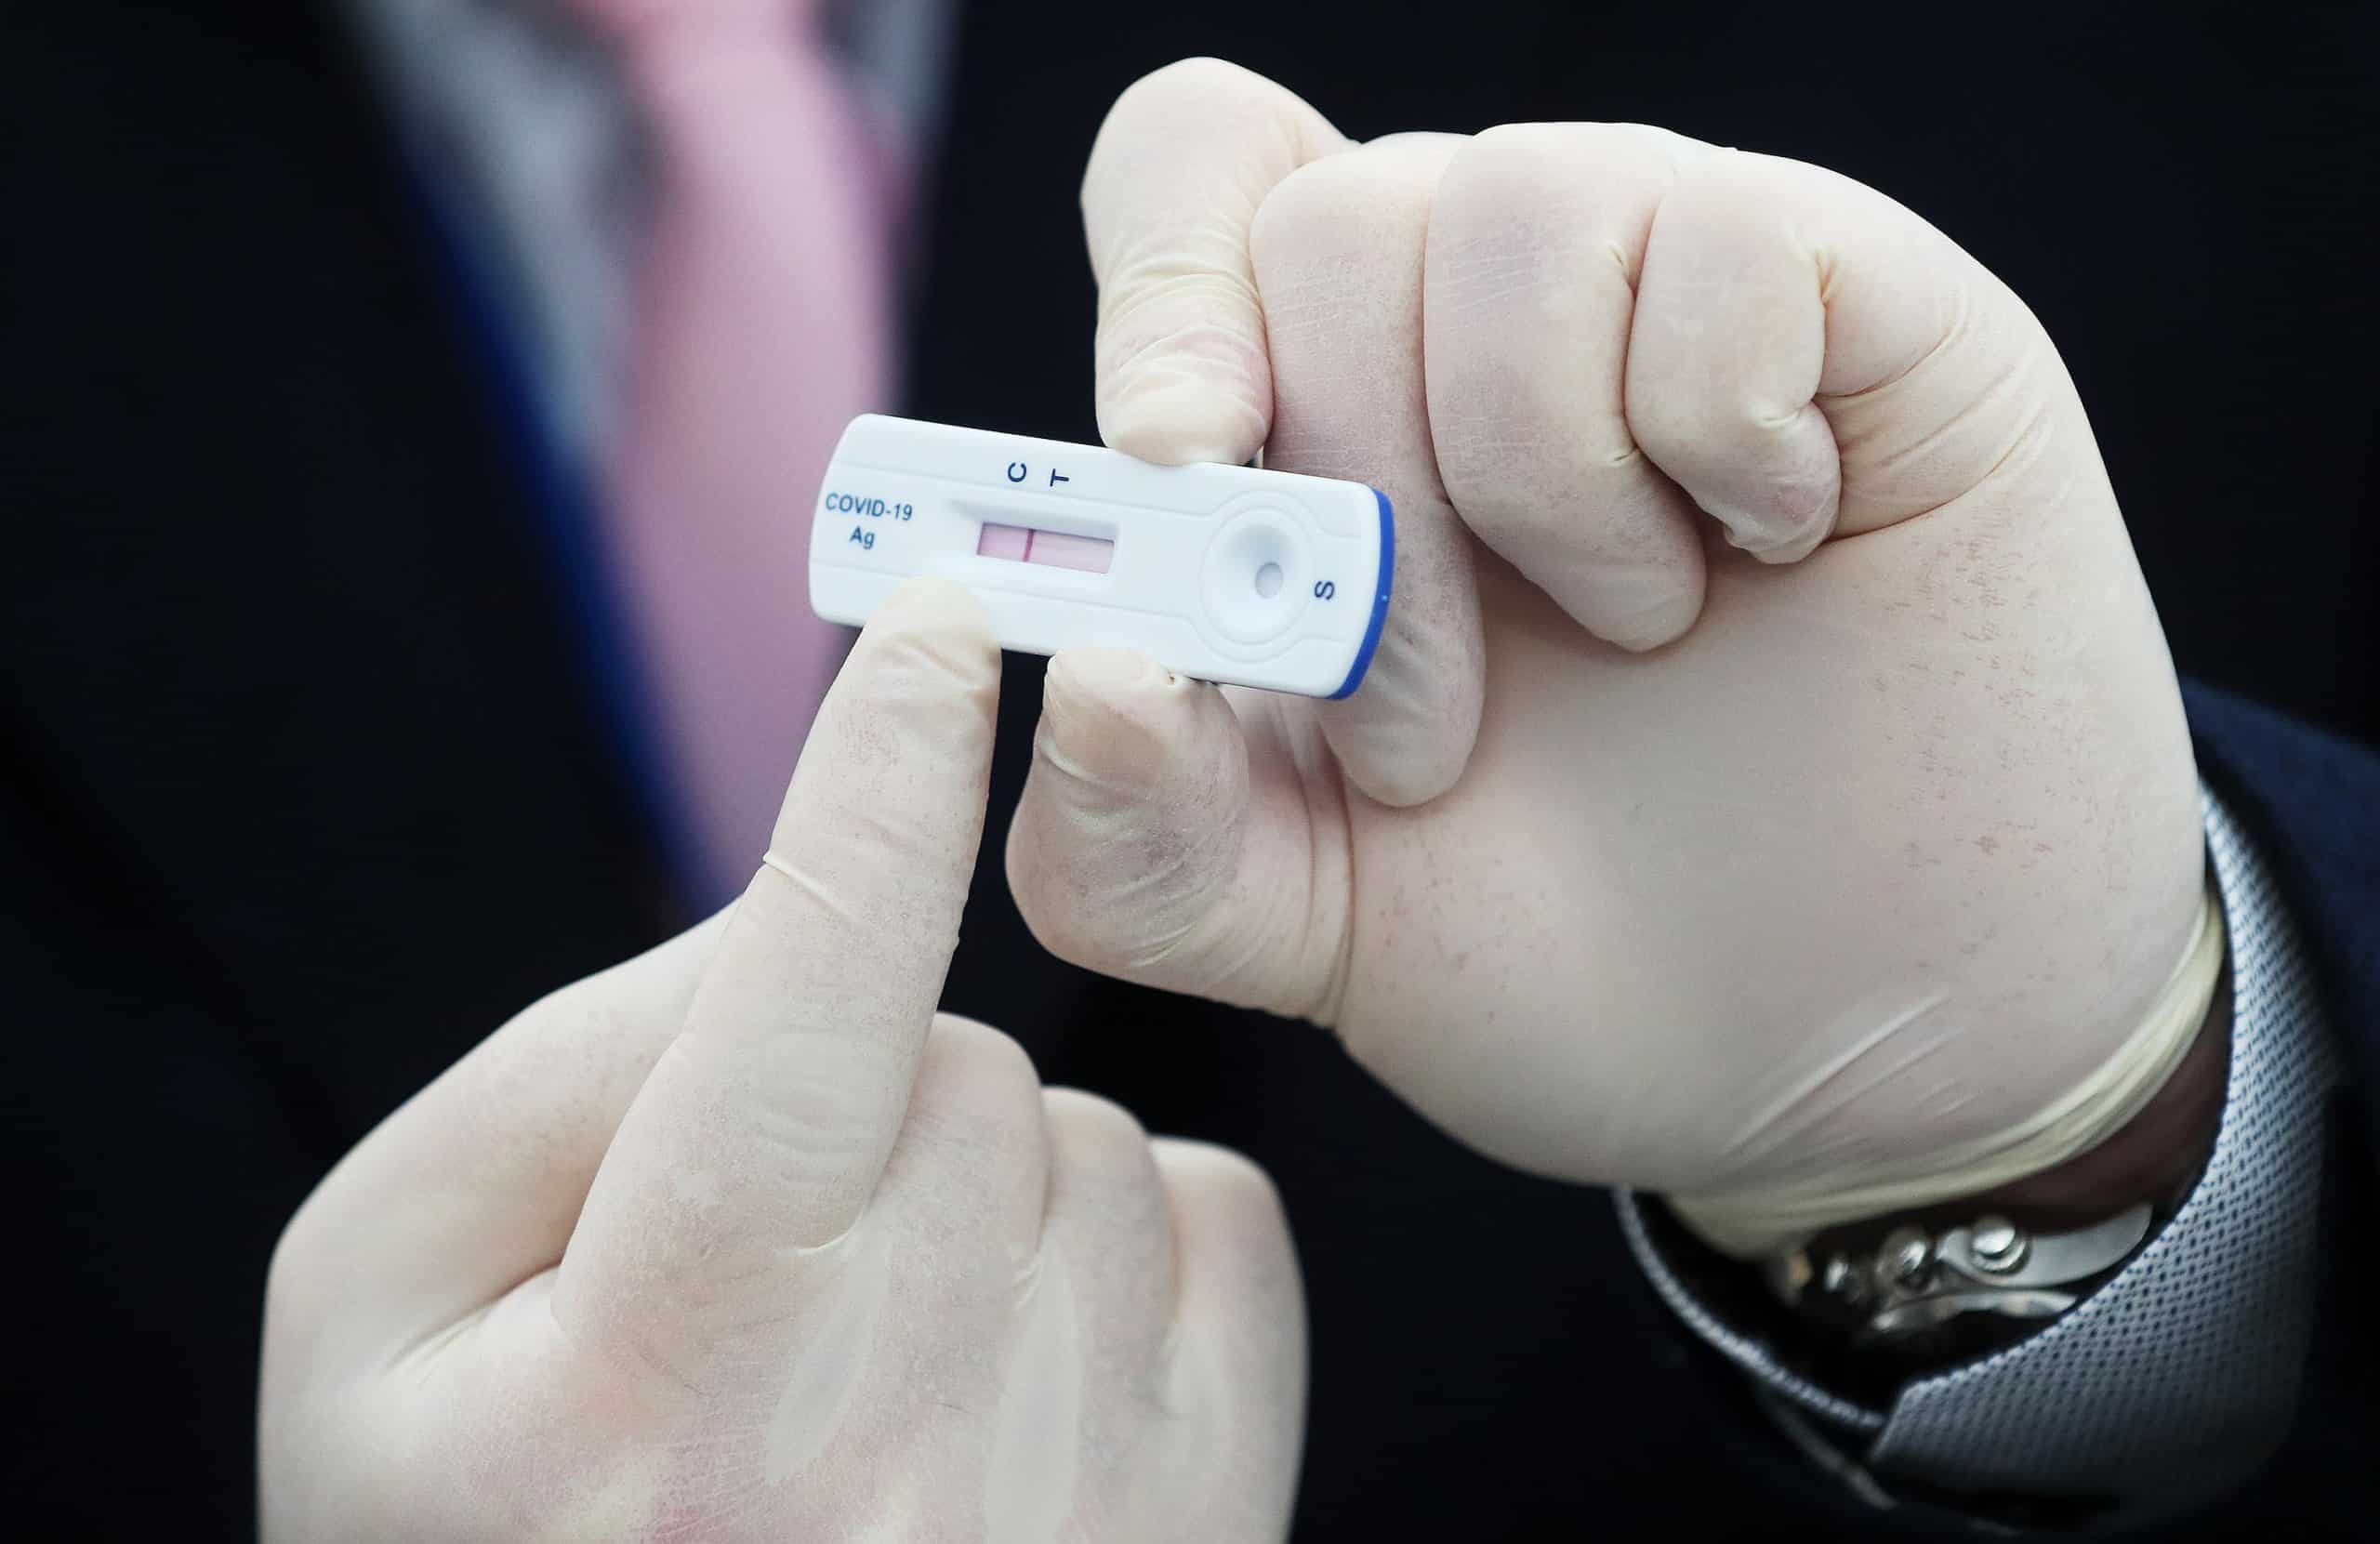 Covid testing firm 'selling swabs carrying customers' DNA' to third parties